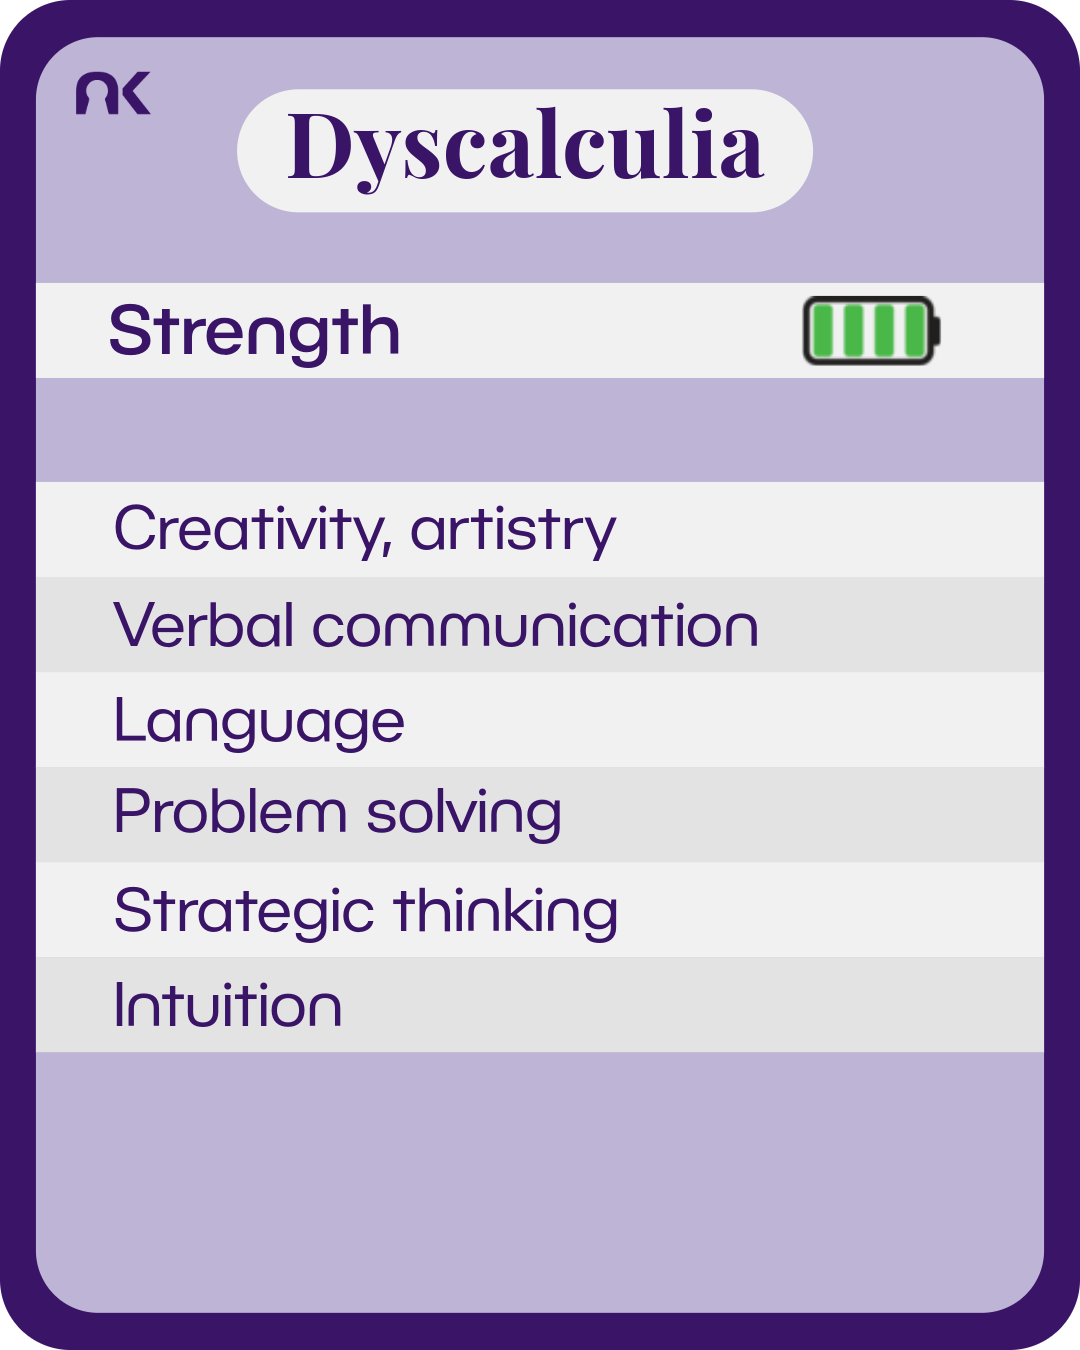 An information card made to look like it is from a card game. Next to the subtitle "strength" is a battery with green bars to show full charge. Text says: "Dyscalculia. Strength. Creativity, artistry; Verbal communication; Language; Problem solving; Strategic thinking; Intuition."